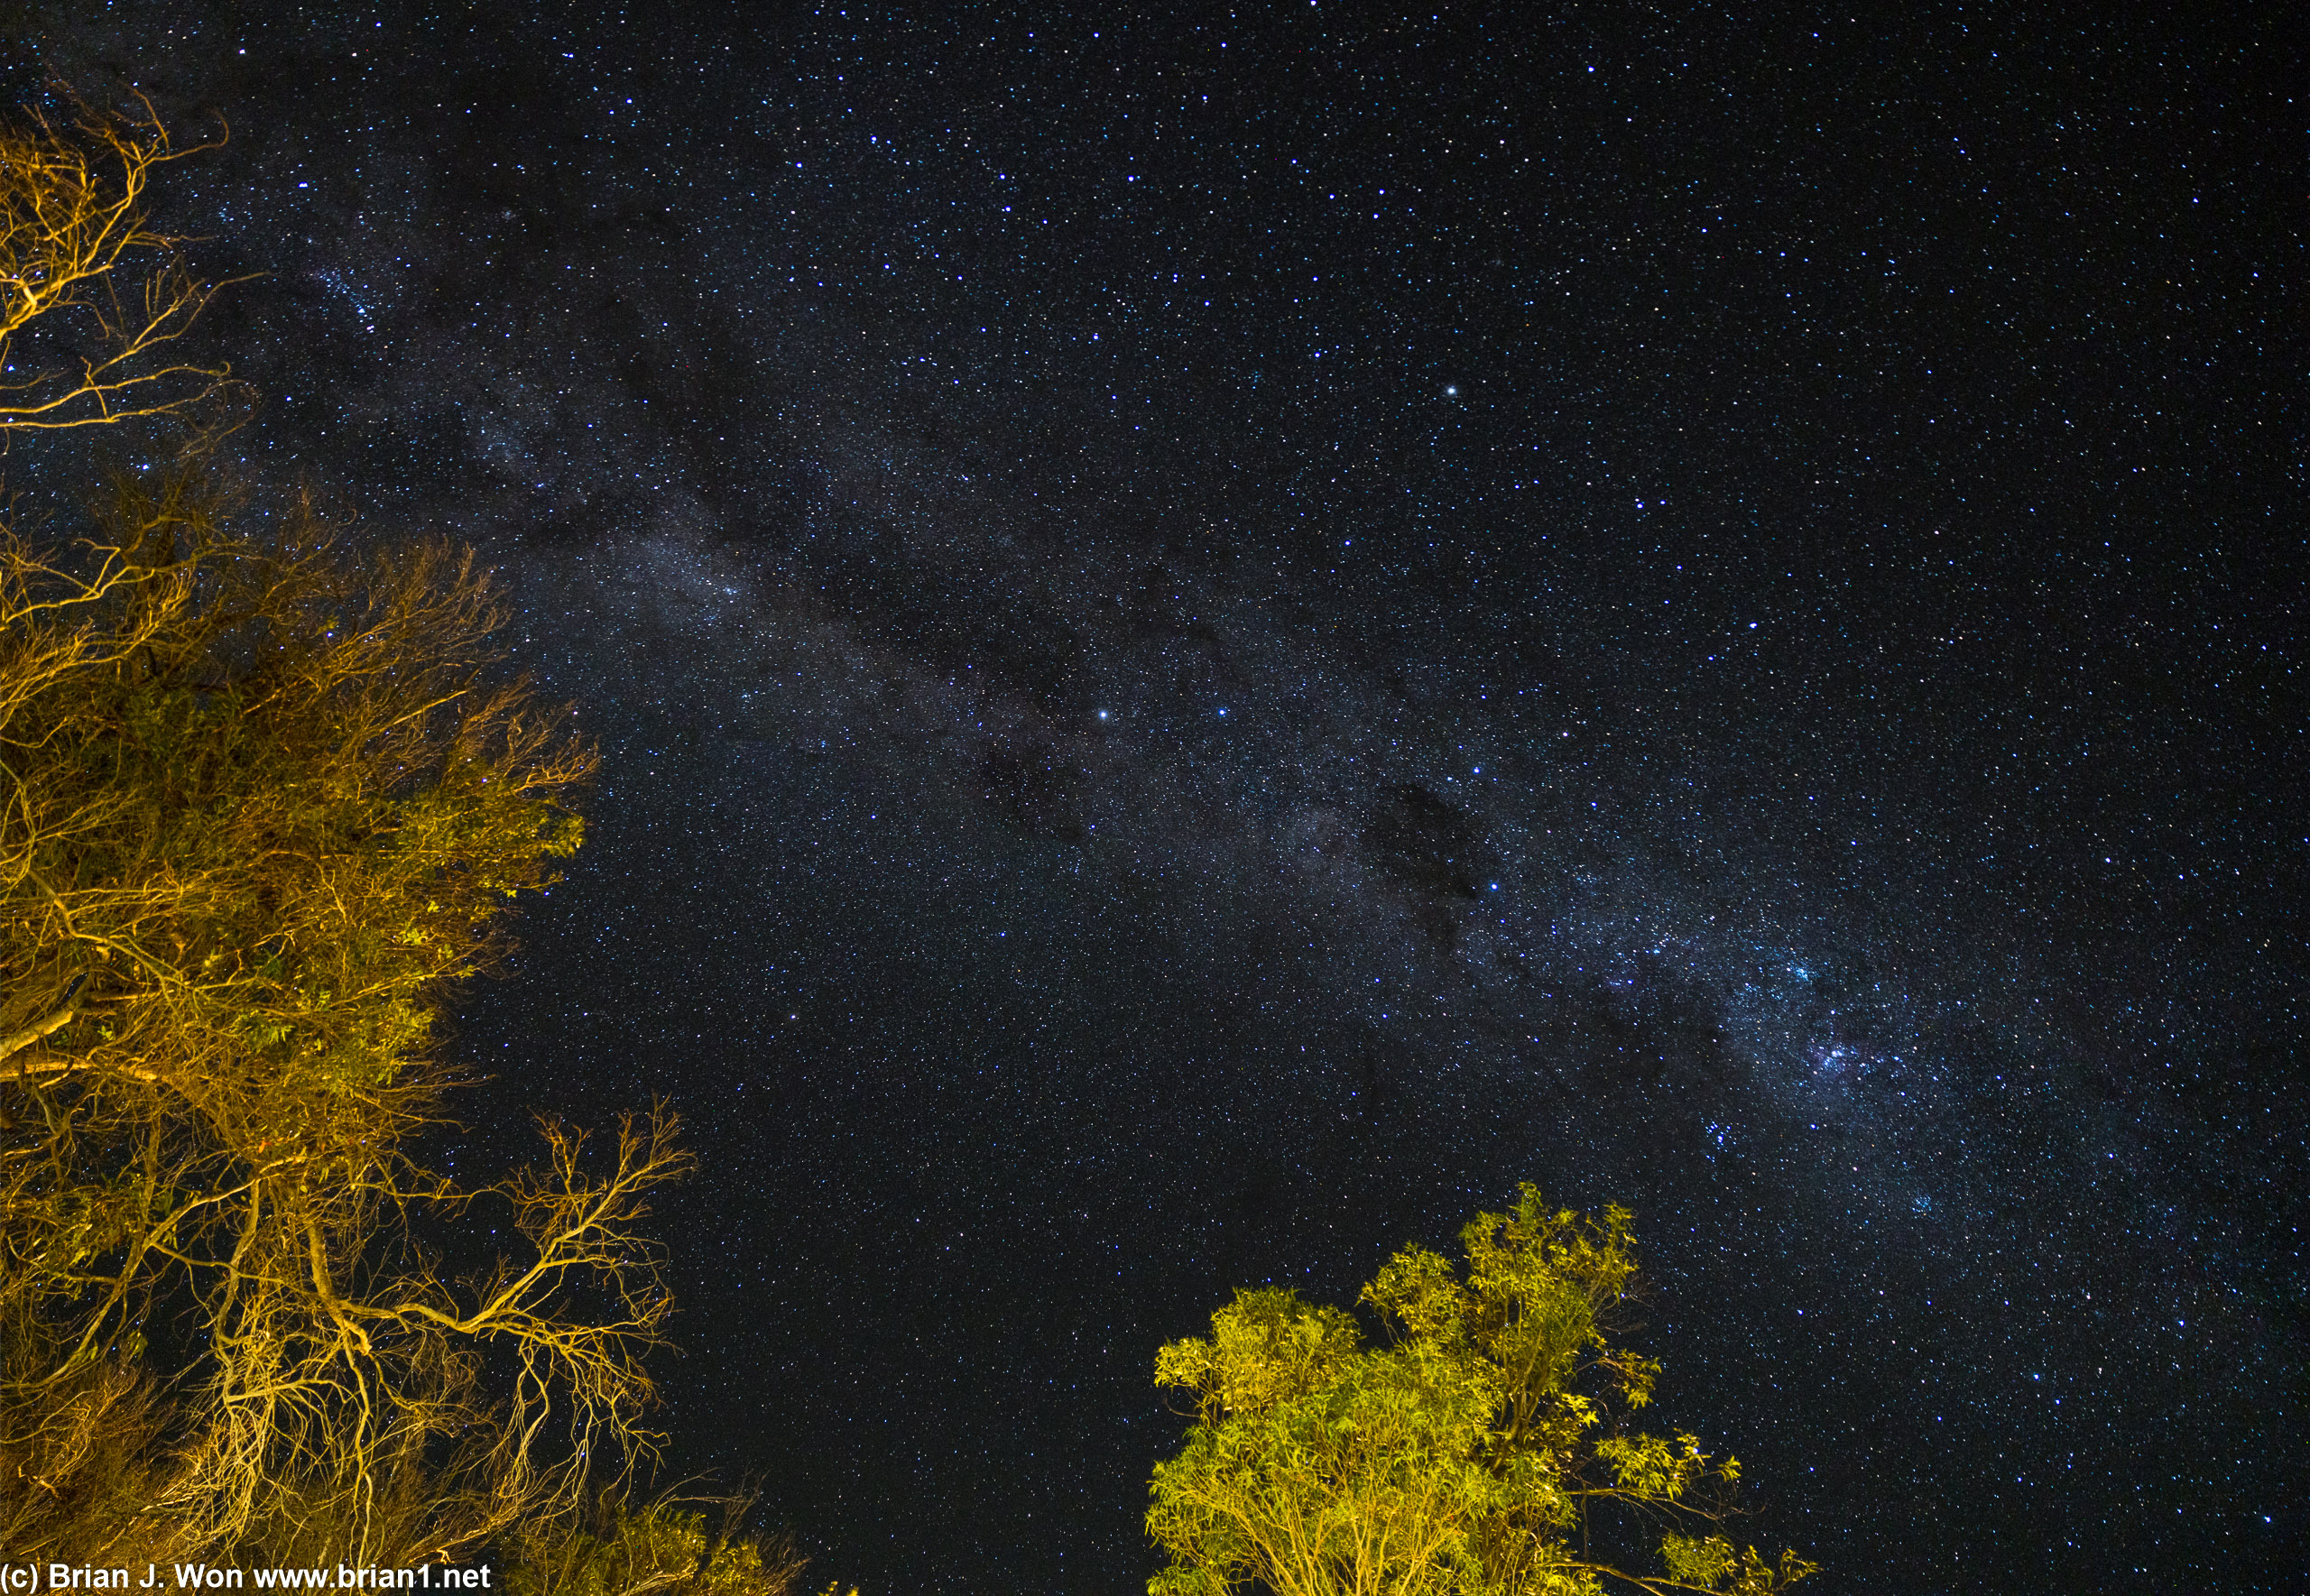 The galactic center visible over lights and trees of the hotel.